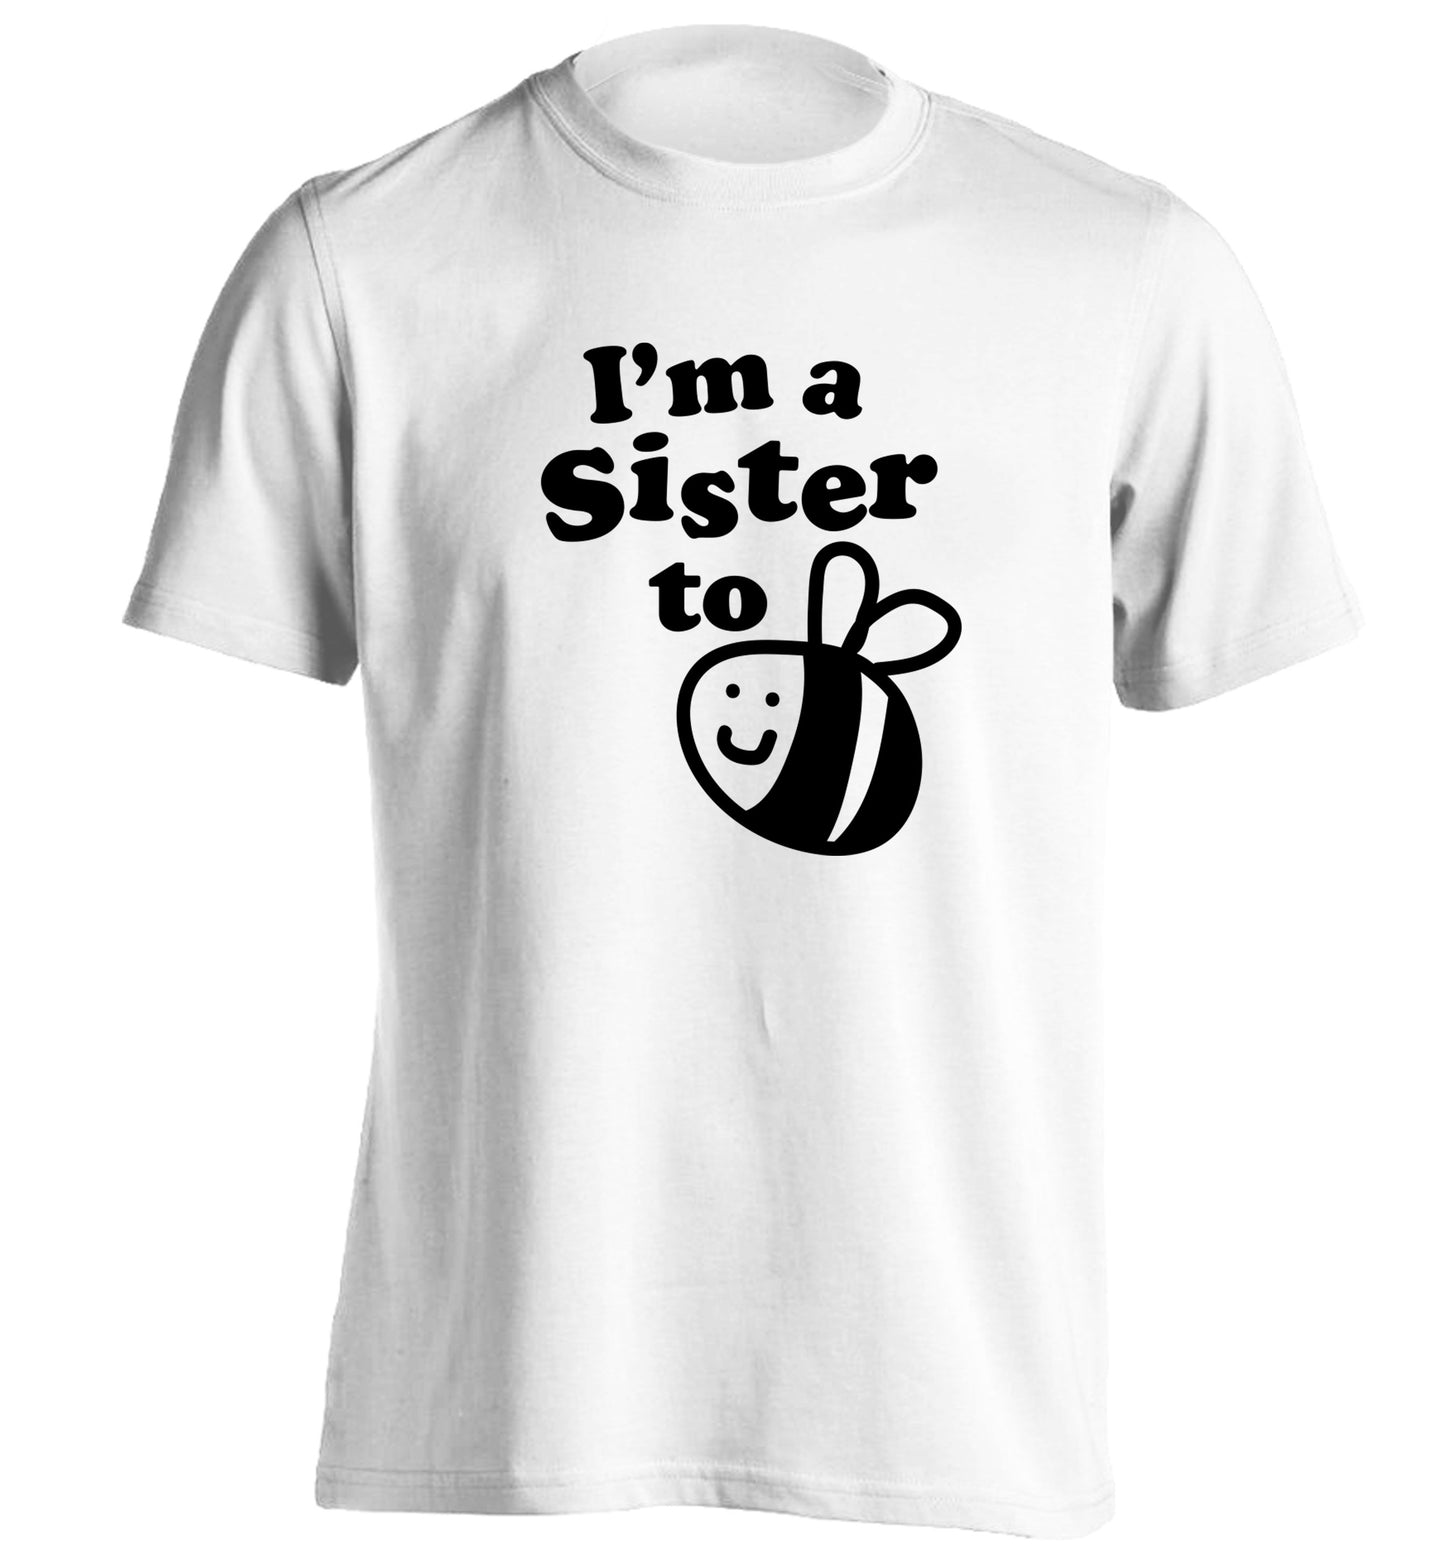 I'm a sister to be adults unisex white Tshirt 2XL